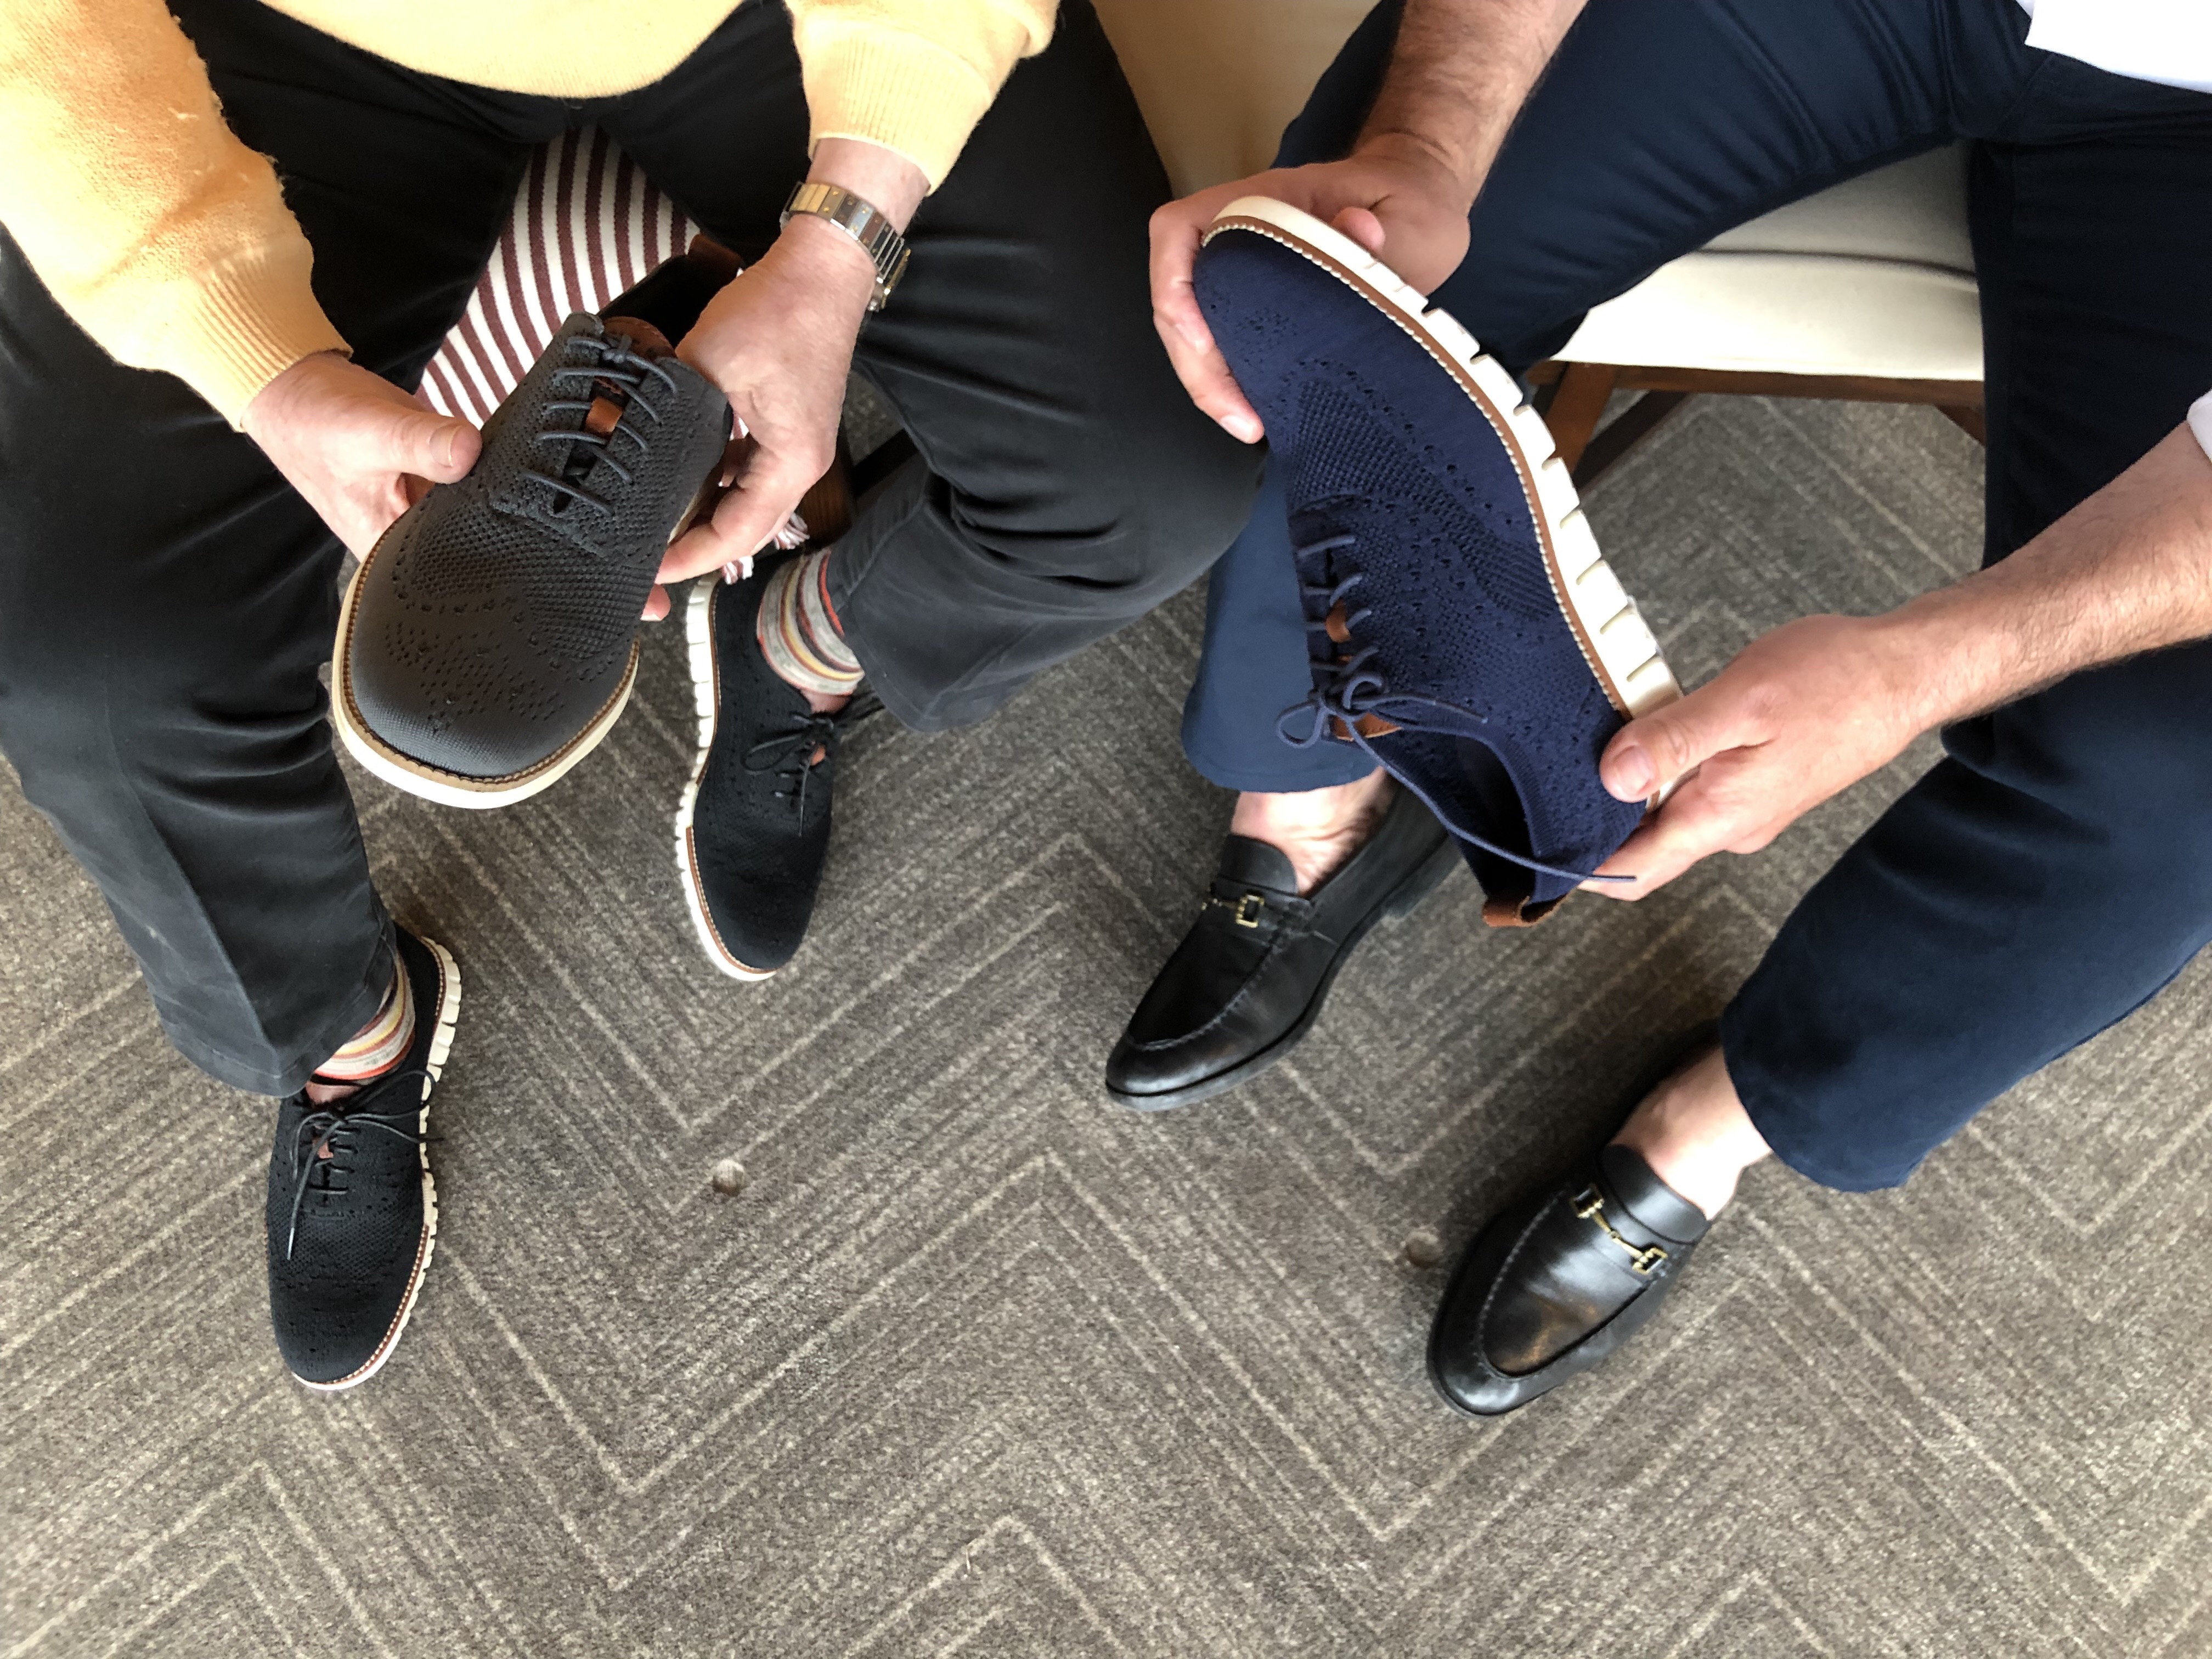 A Visit from Cole Haan - The Shoe Mart